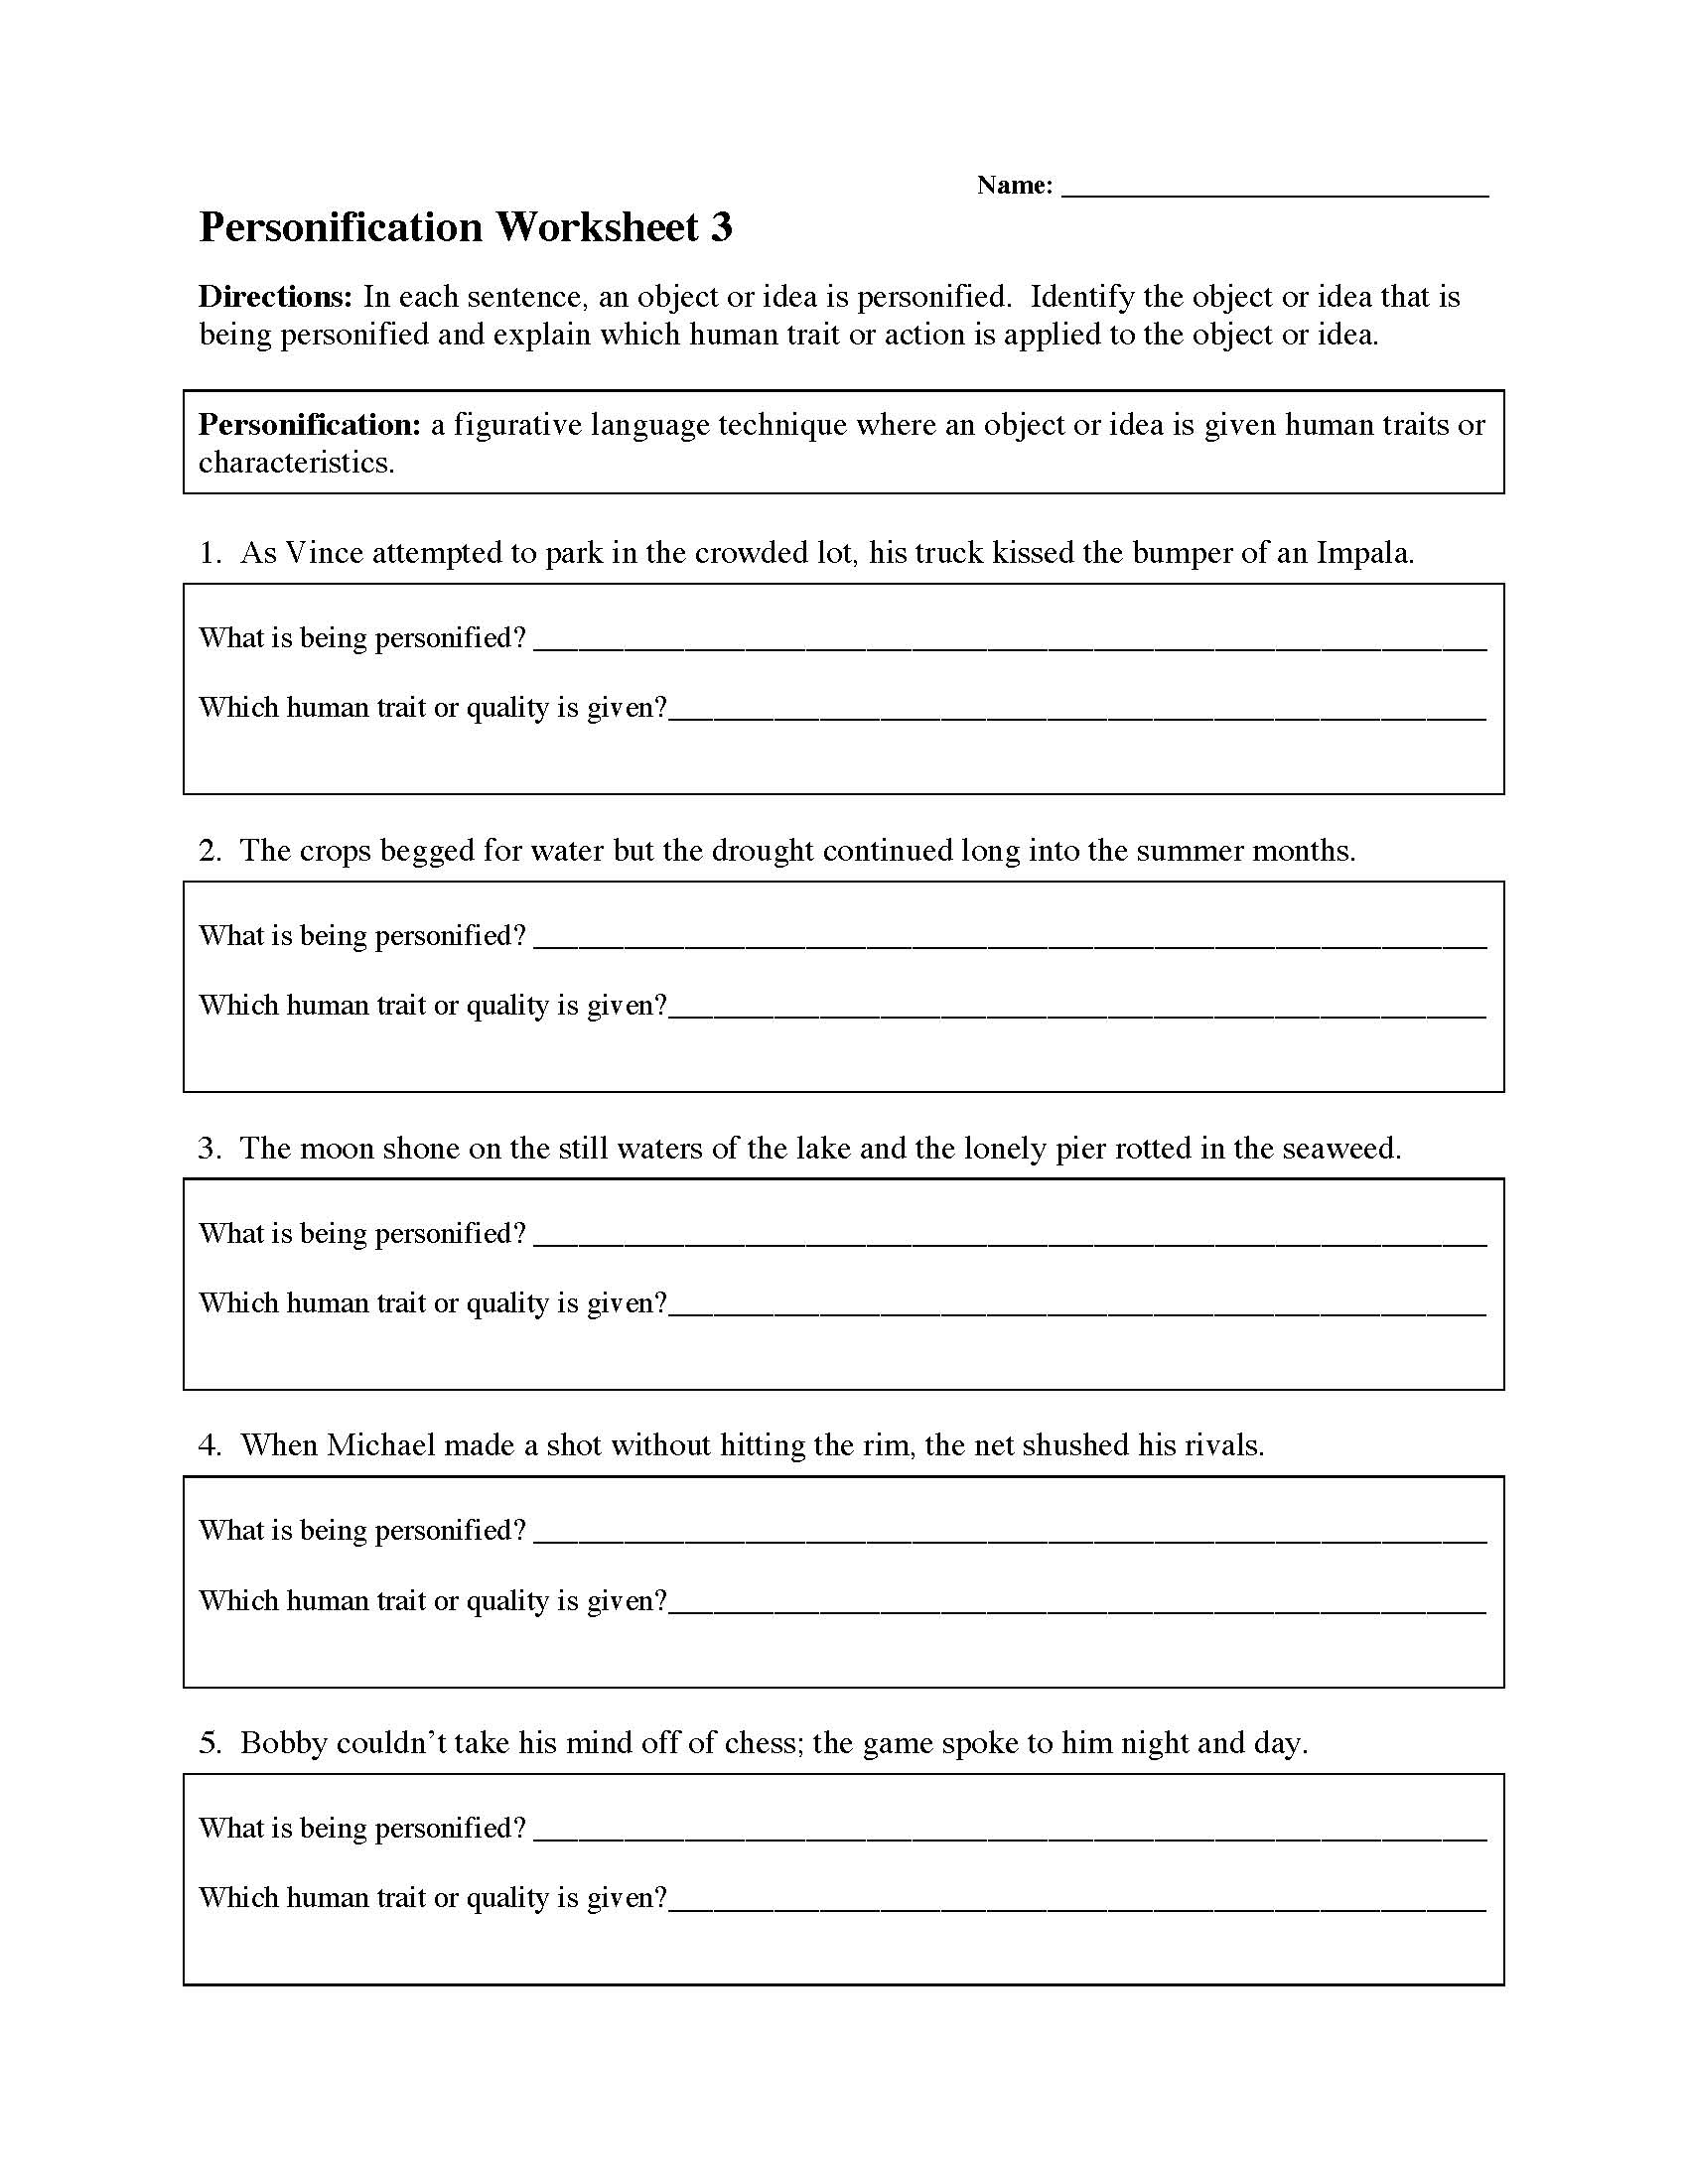 This is a preview image of Personification Worksheet 3. Click on it to enlarge it or view the source file.